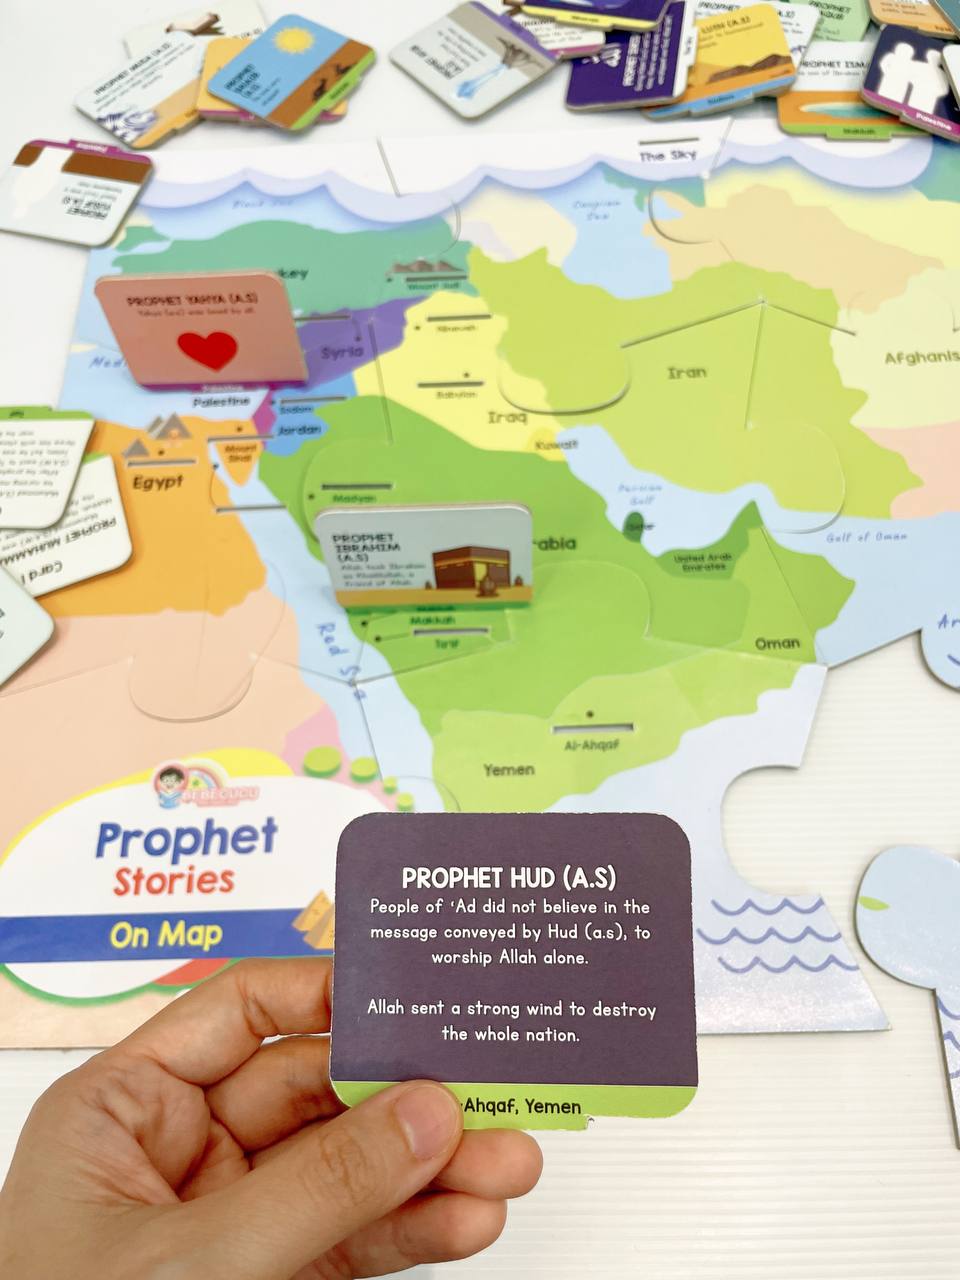 Prophet Stories on the Map